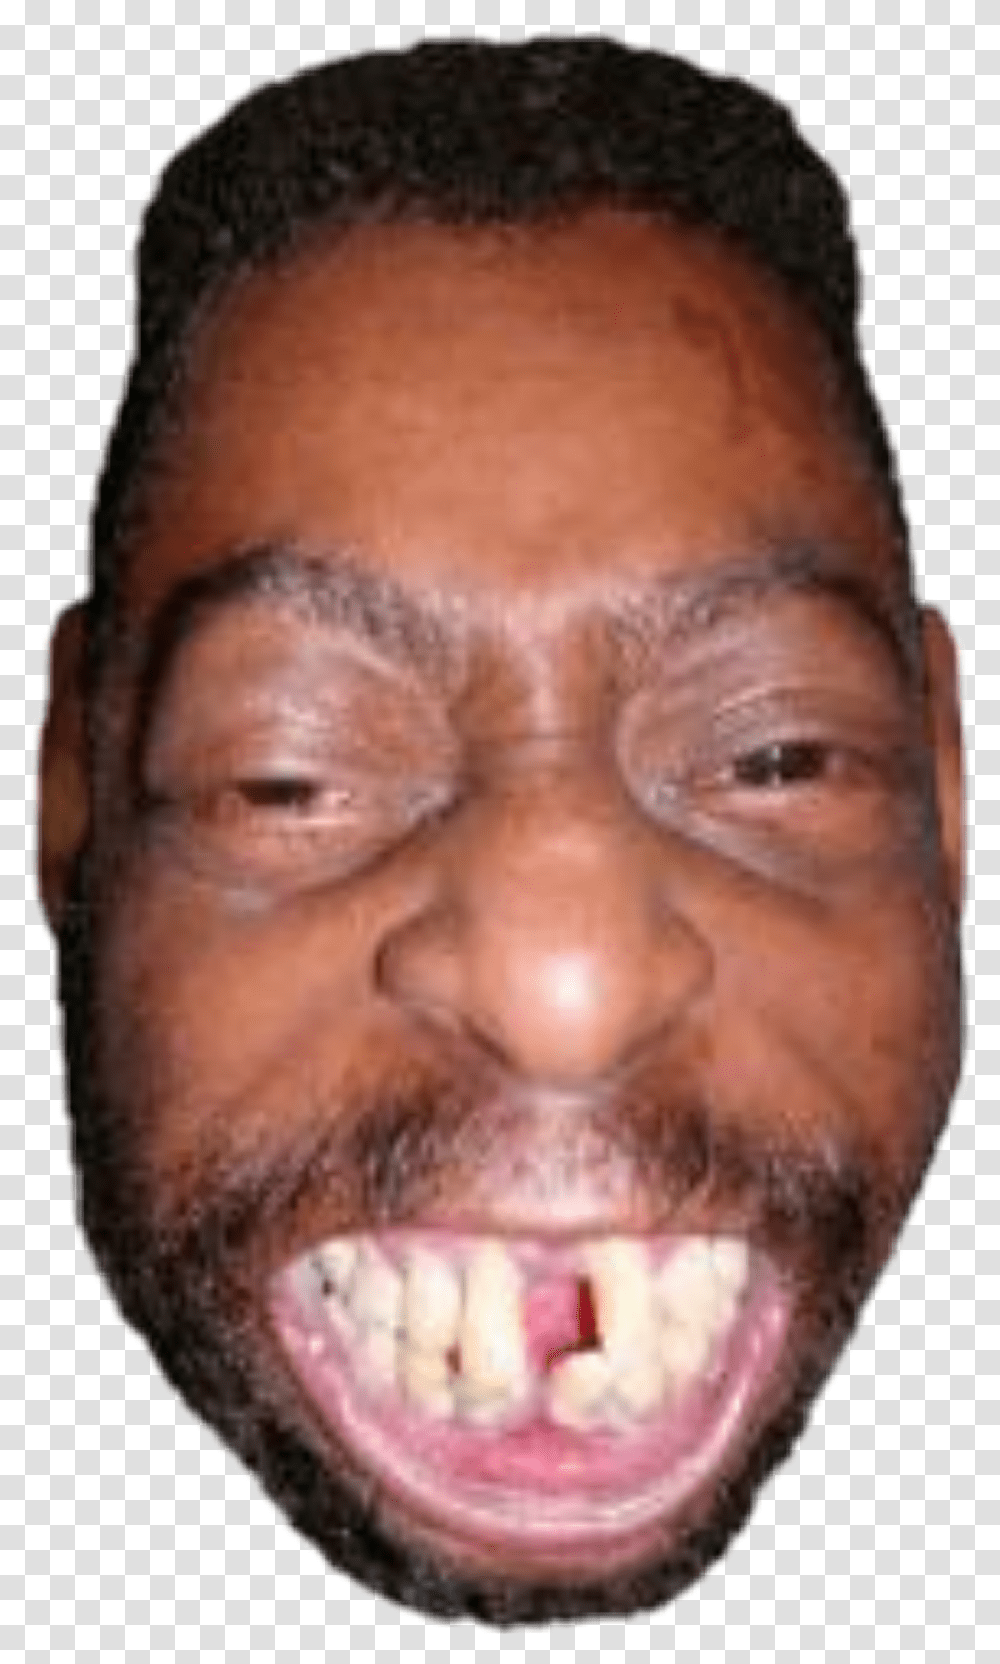 Download Beetlejuice Sticker People With Messed Up Teeth, Head, Face, Person, Smile Transparent Png